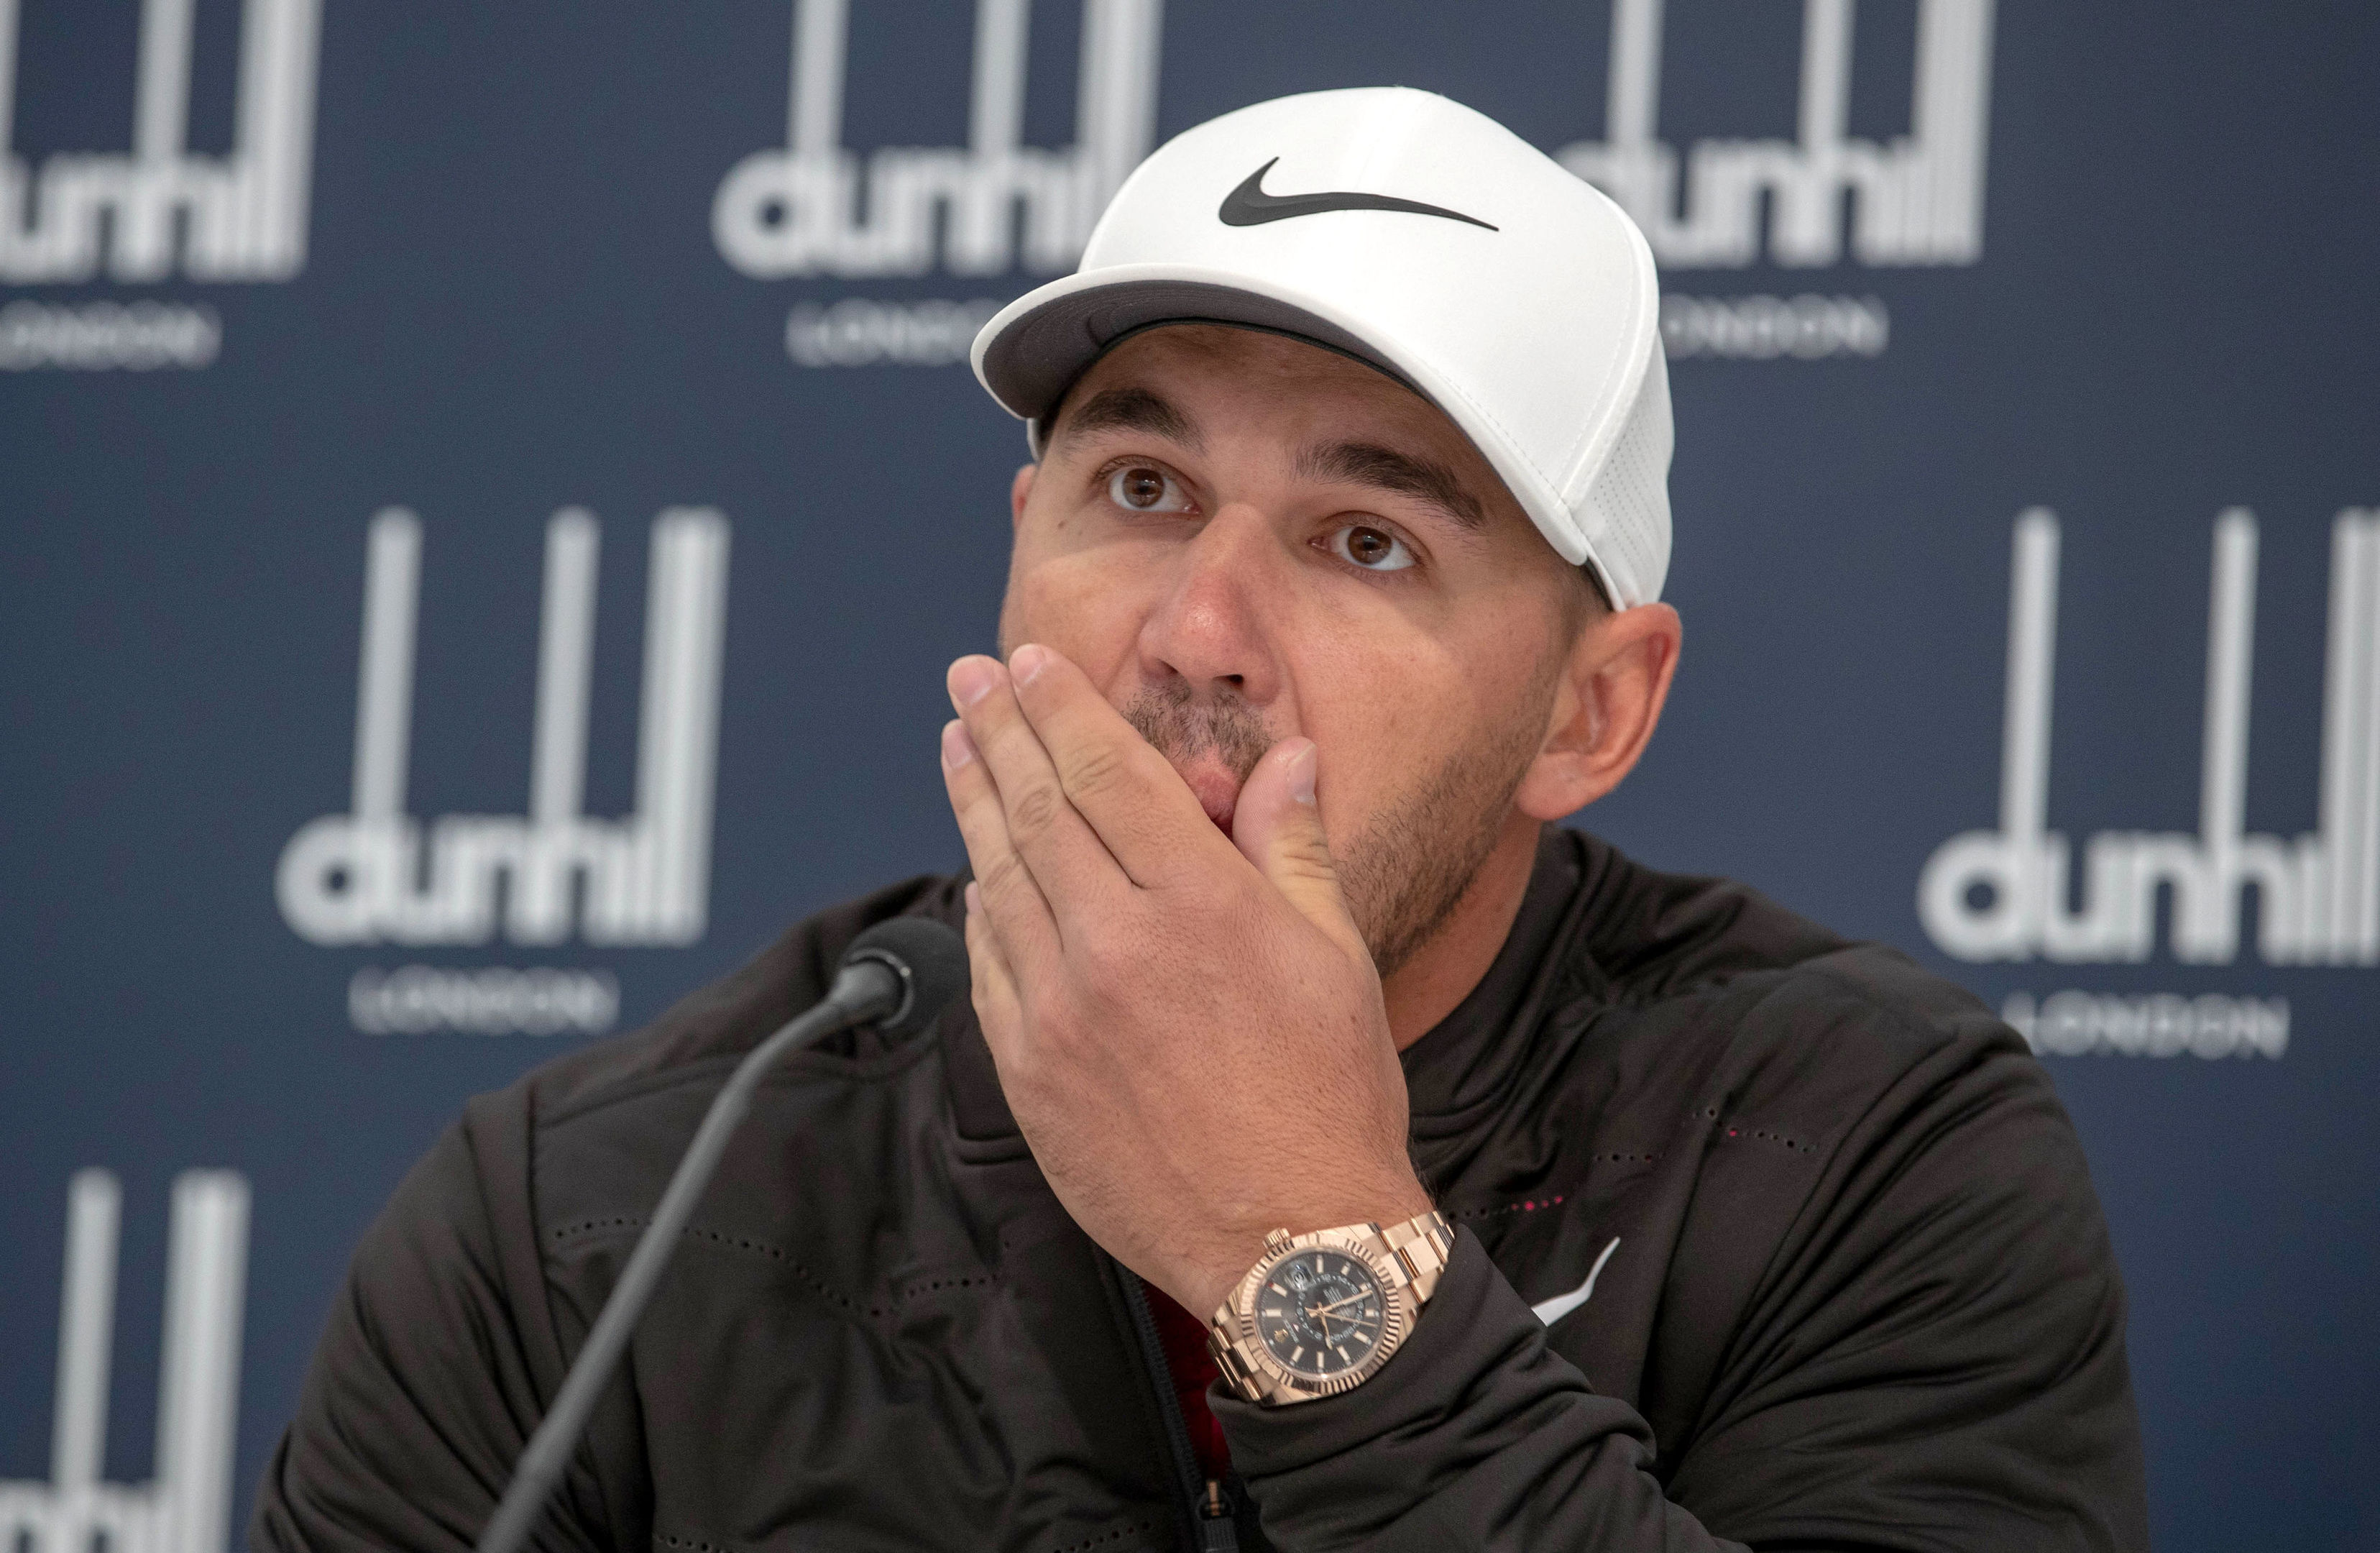 Brooks Koepka had "one of the worst days of his life" after a fan was partially blinded by a wayward drive.